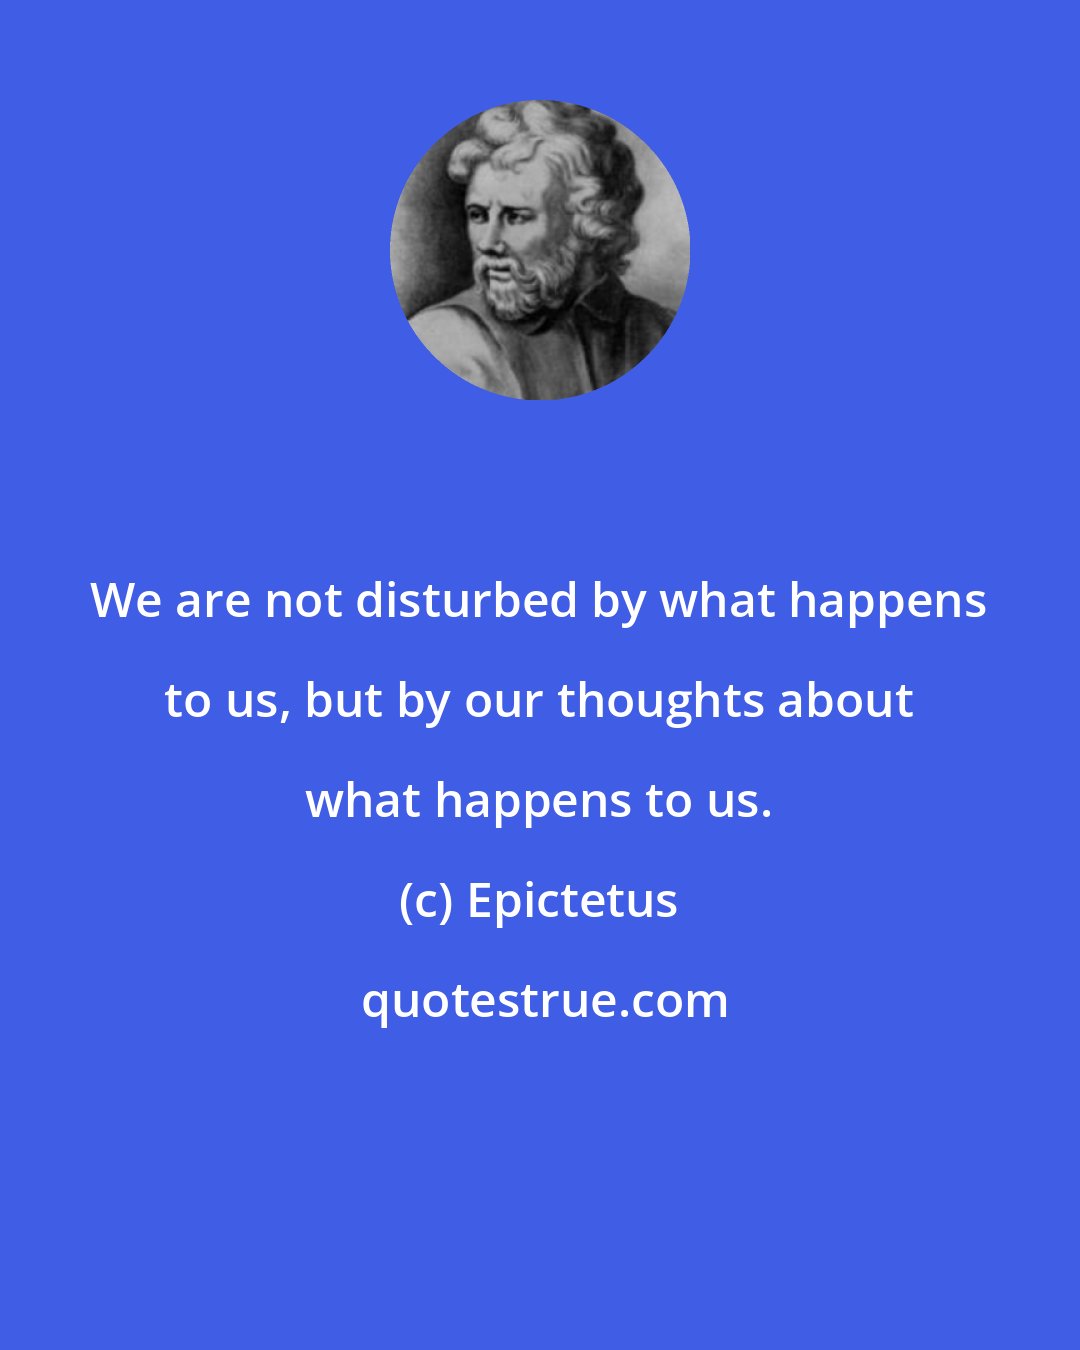 Epictetus: We are not disturbed by what happens to us, but by our thoughts about what happens to us.